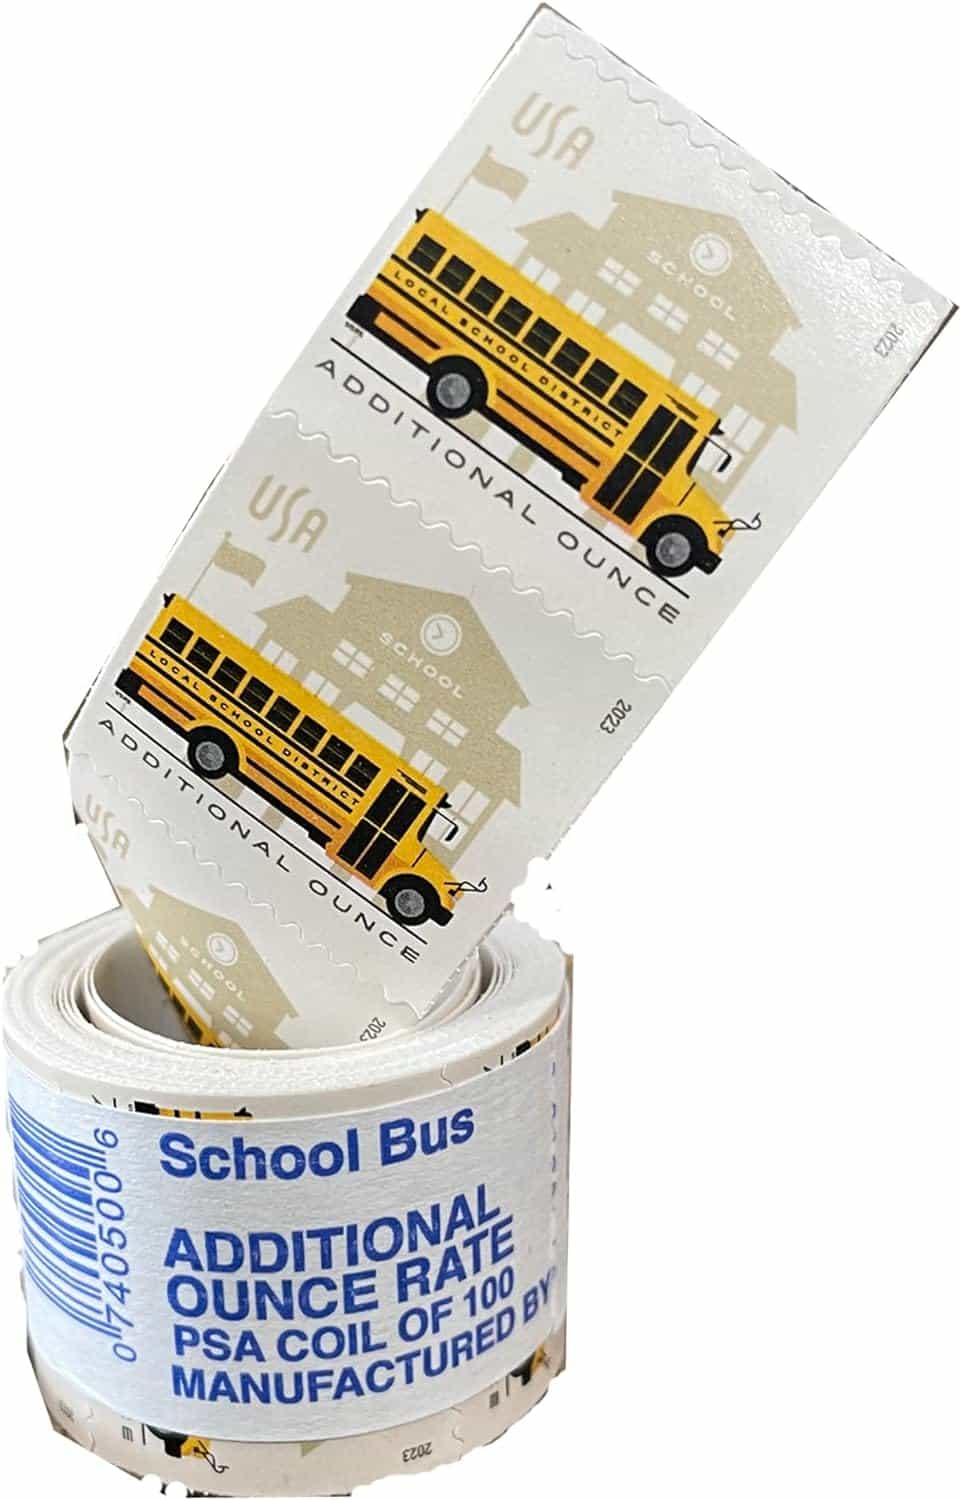 School Bus Additional Ounce USPS Postage Stamps 1 Coil of 100 Stamps